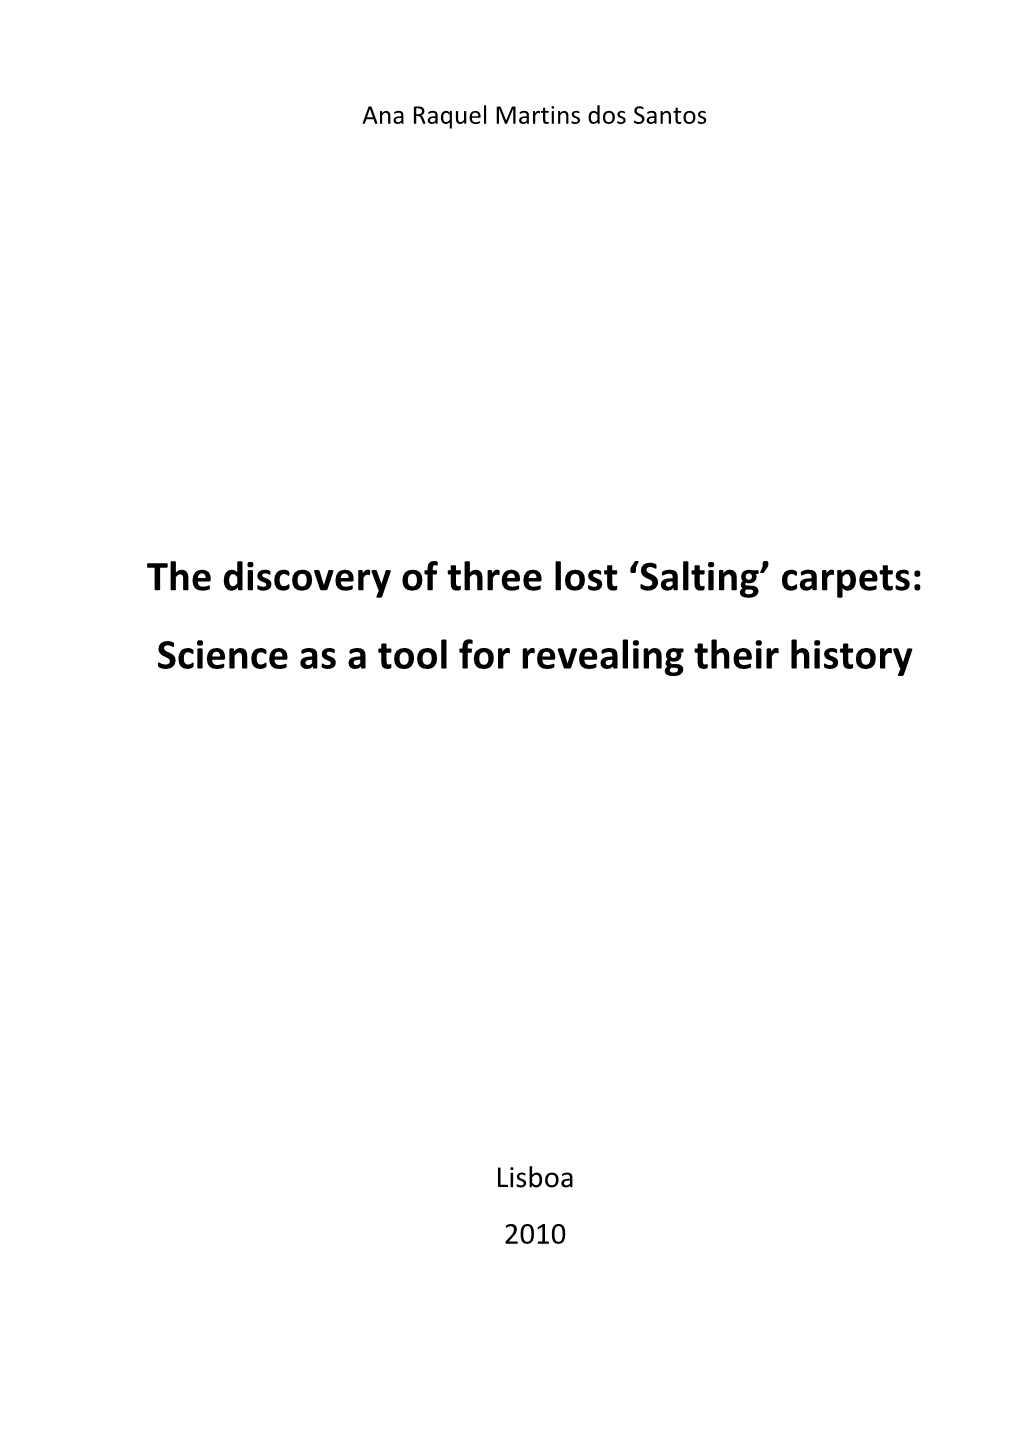 'Salting' Carpets: Science As a Tool for Revealing Their History